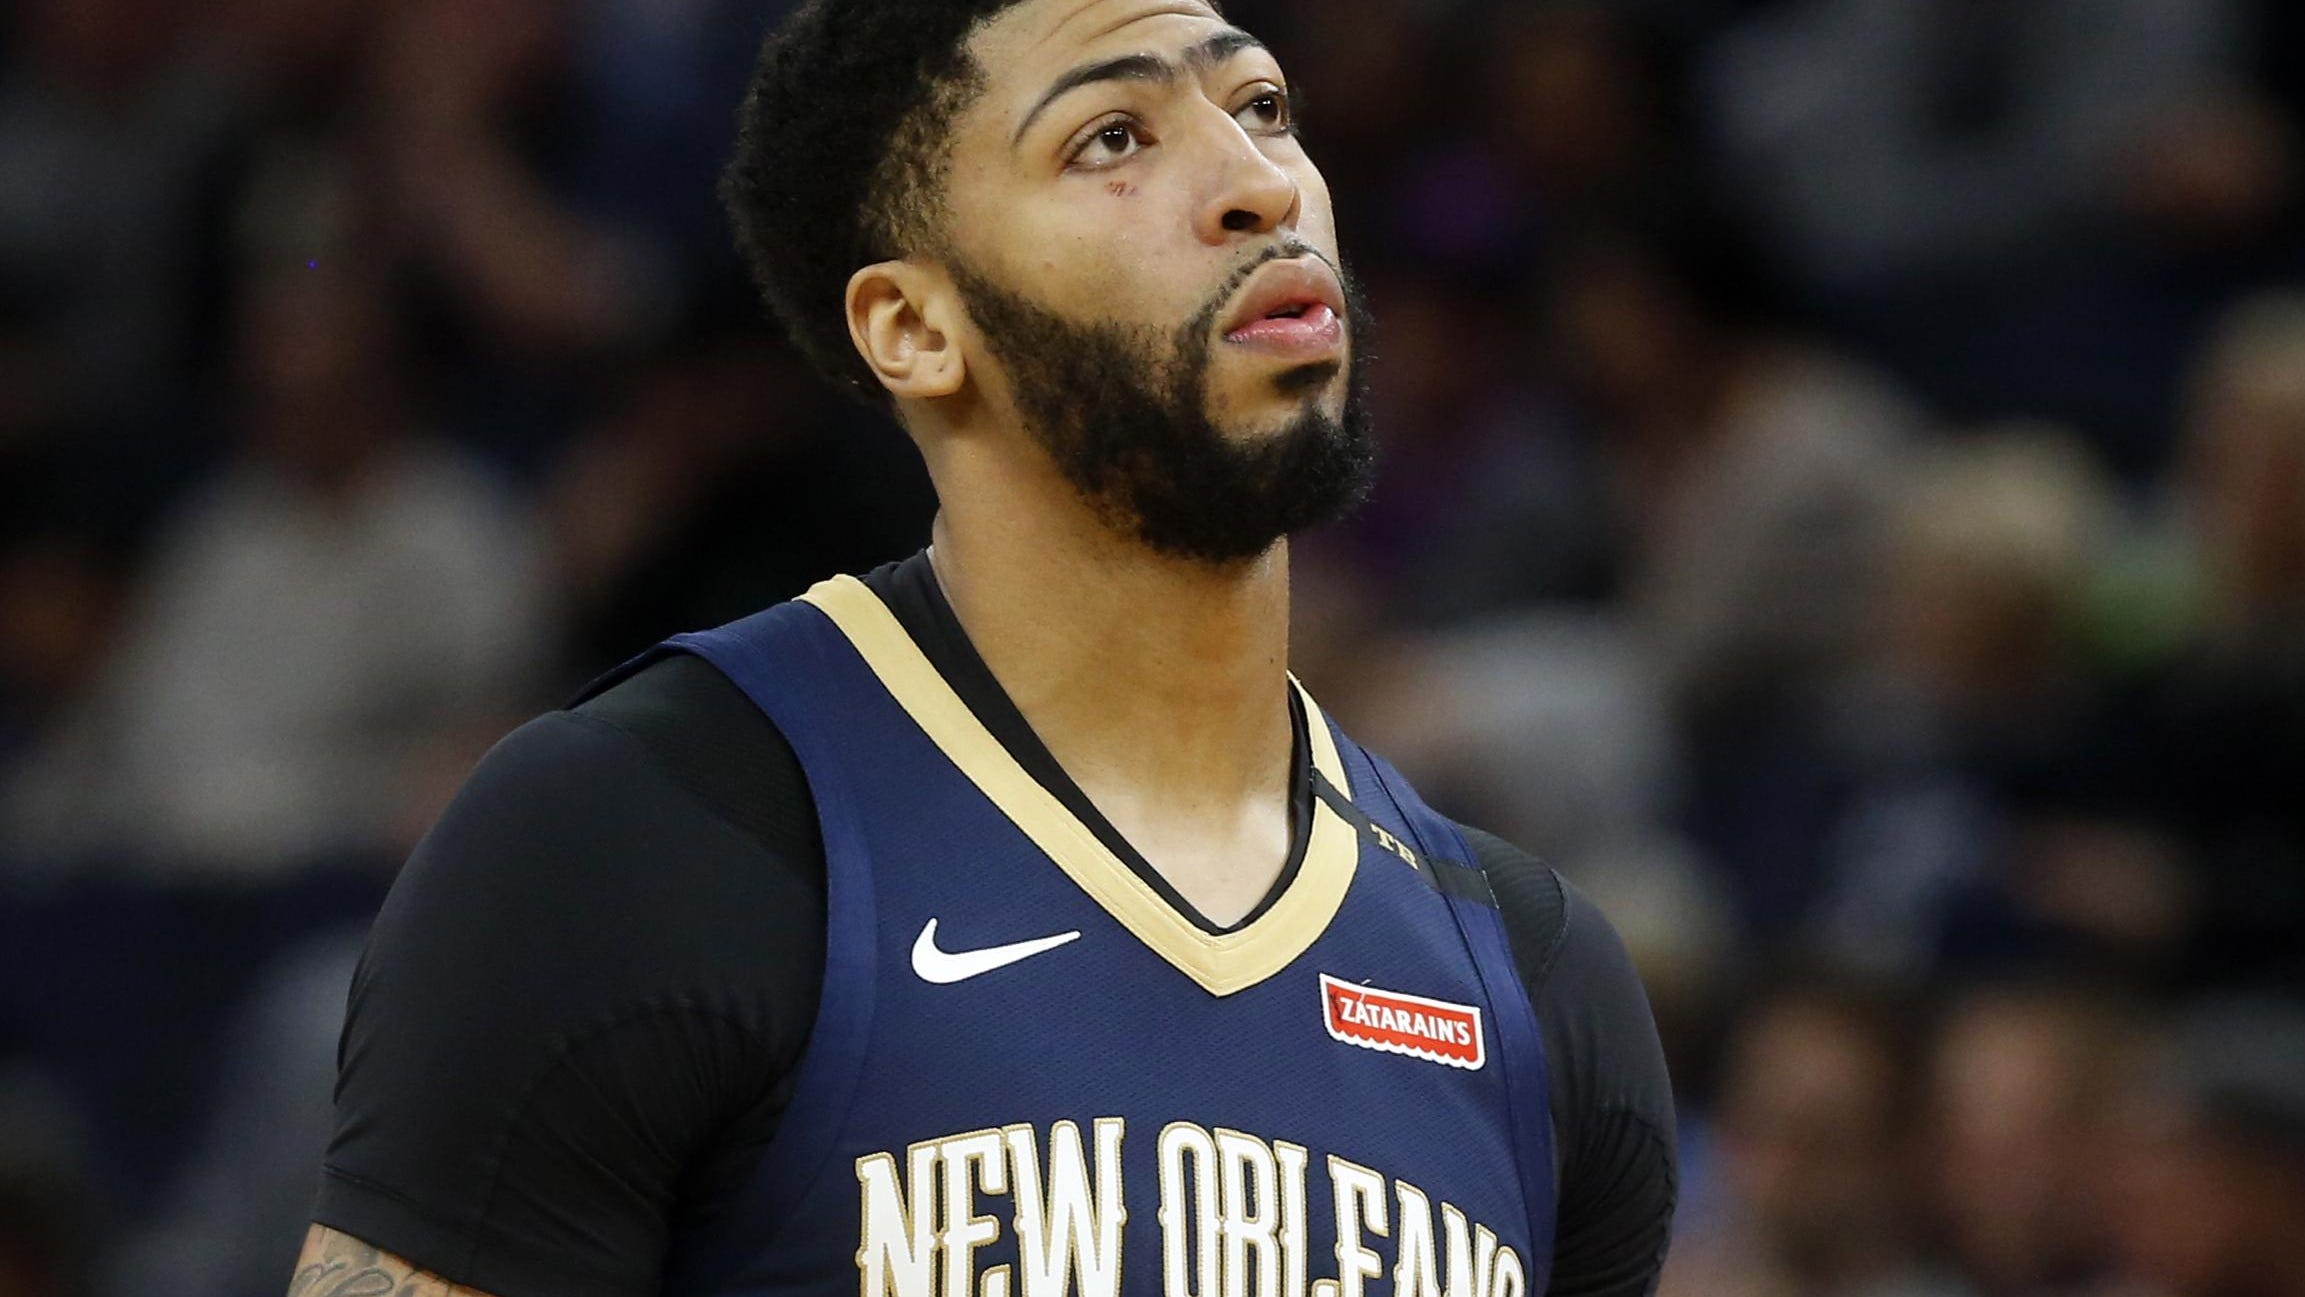 Pelicans forward Anthony Davis is having the best season of his career, averaging 29.3 points and 13.3 rebounds per game.